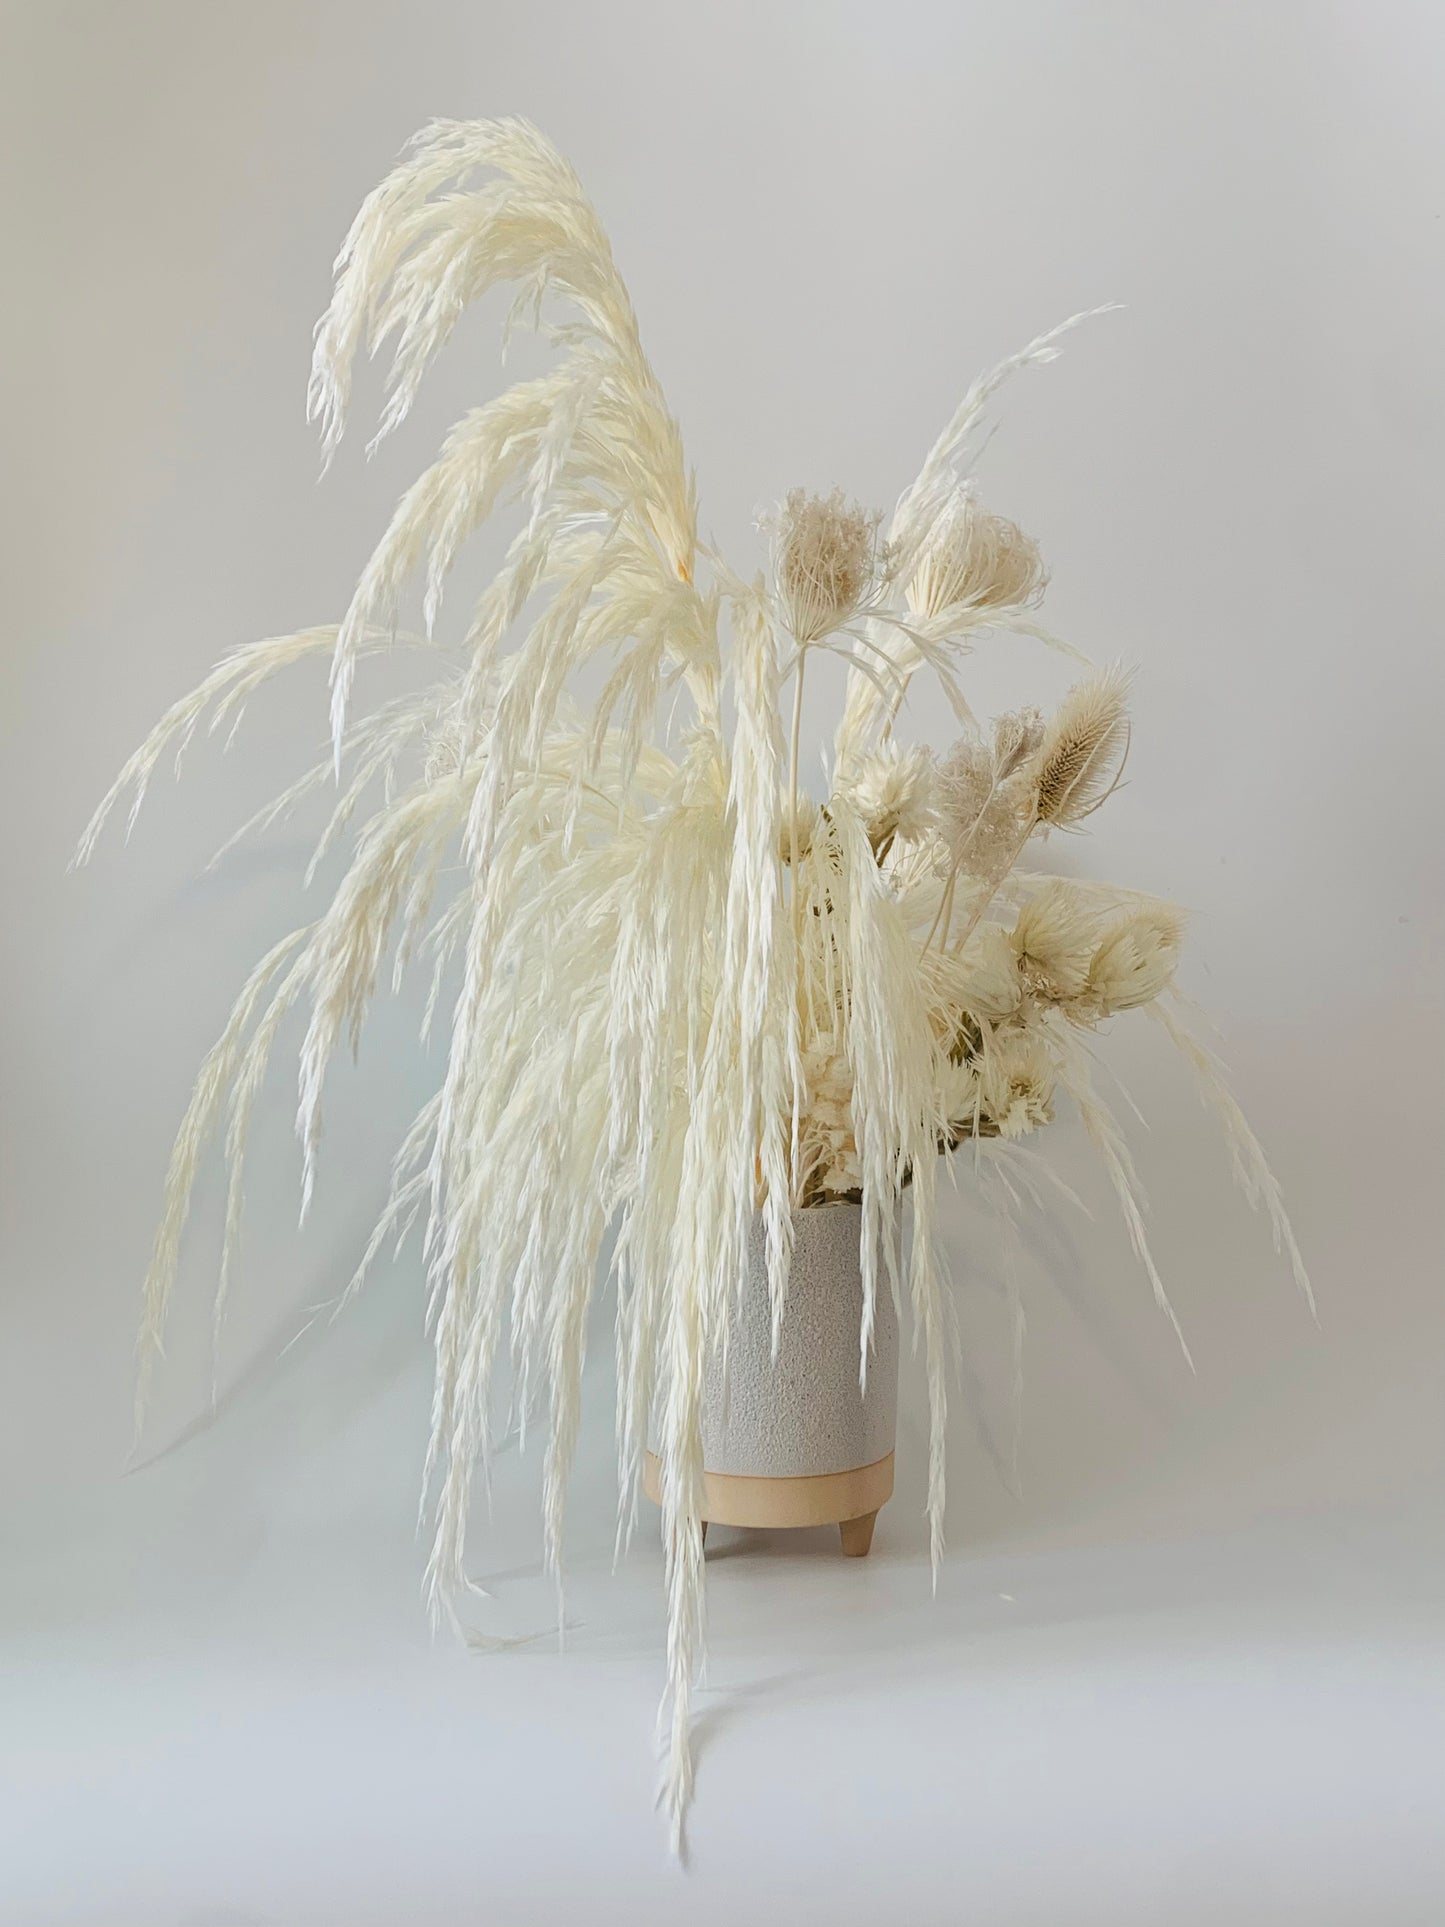 A maintenance-free, artistic white vase with dried grass in it from TAKAYASATO.COM's ETERNAL collection.